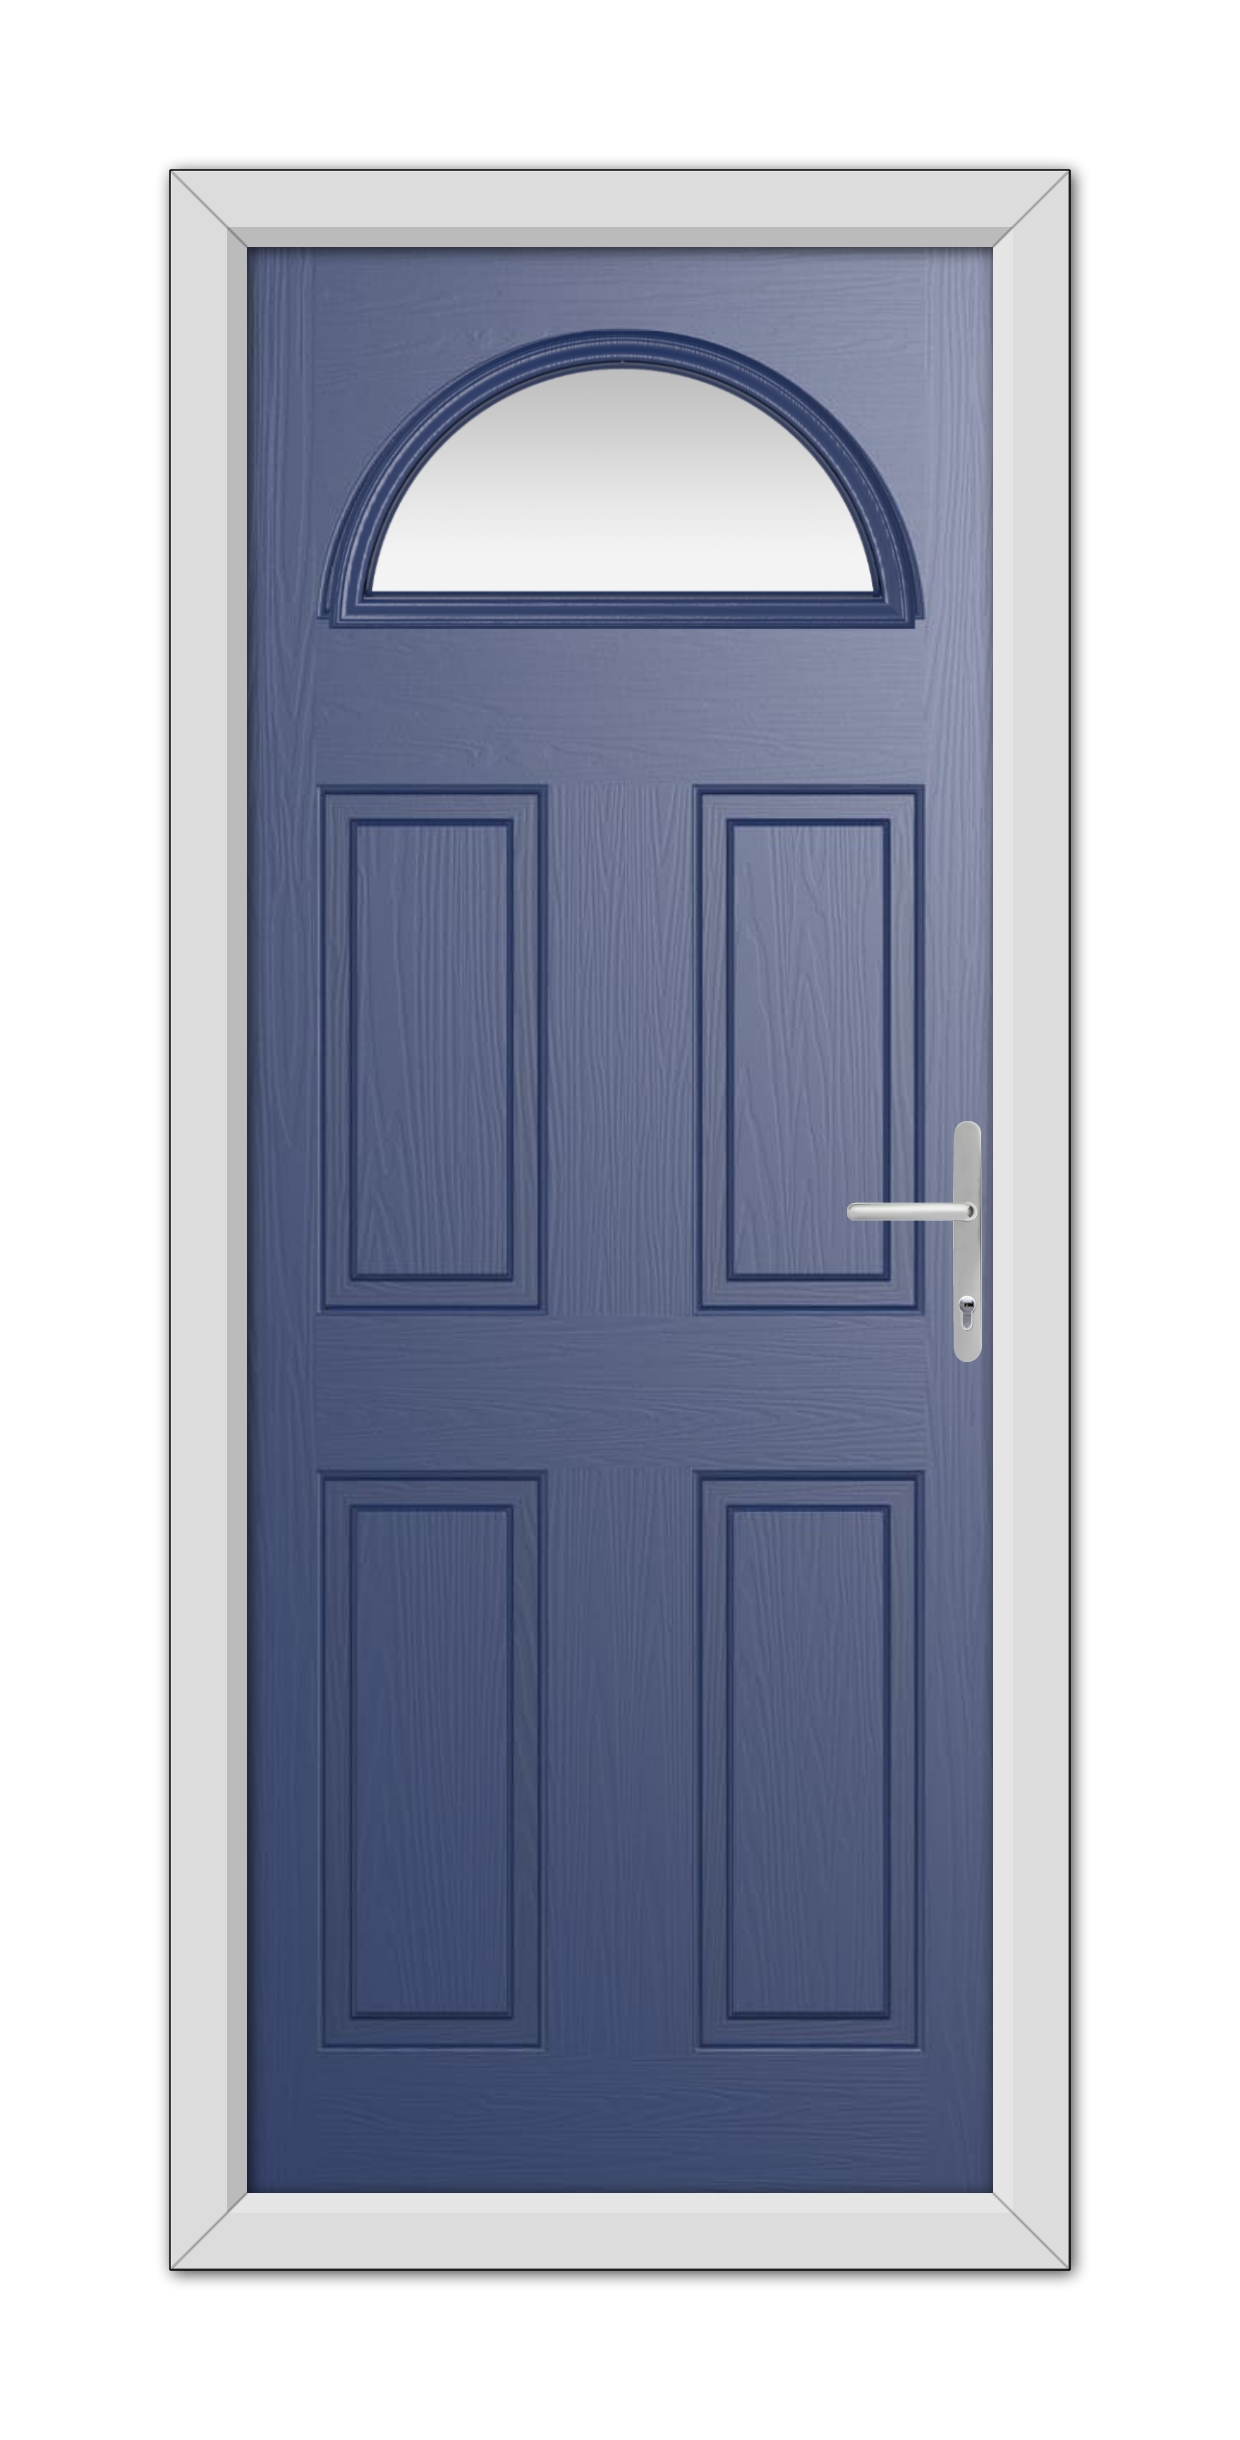 A Blue Seville Solid uPVC Door with six panels and a silver handle, featuring an arched window at the top, set within a white frame.